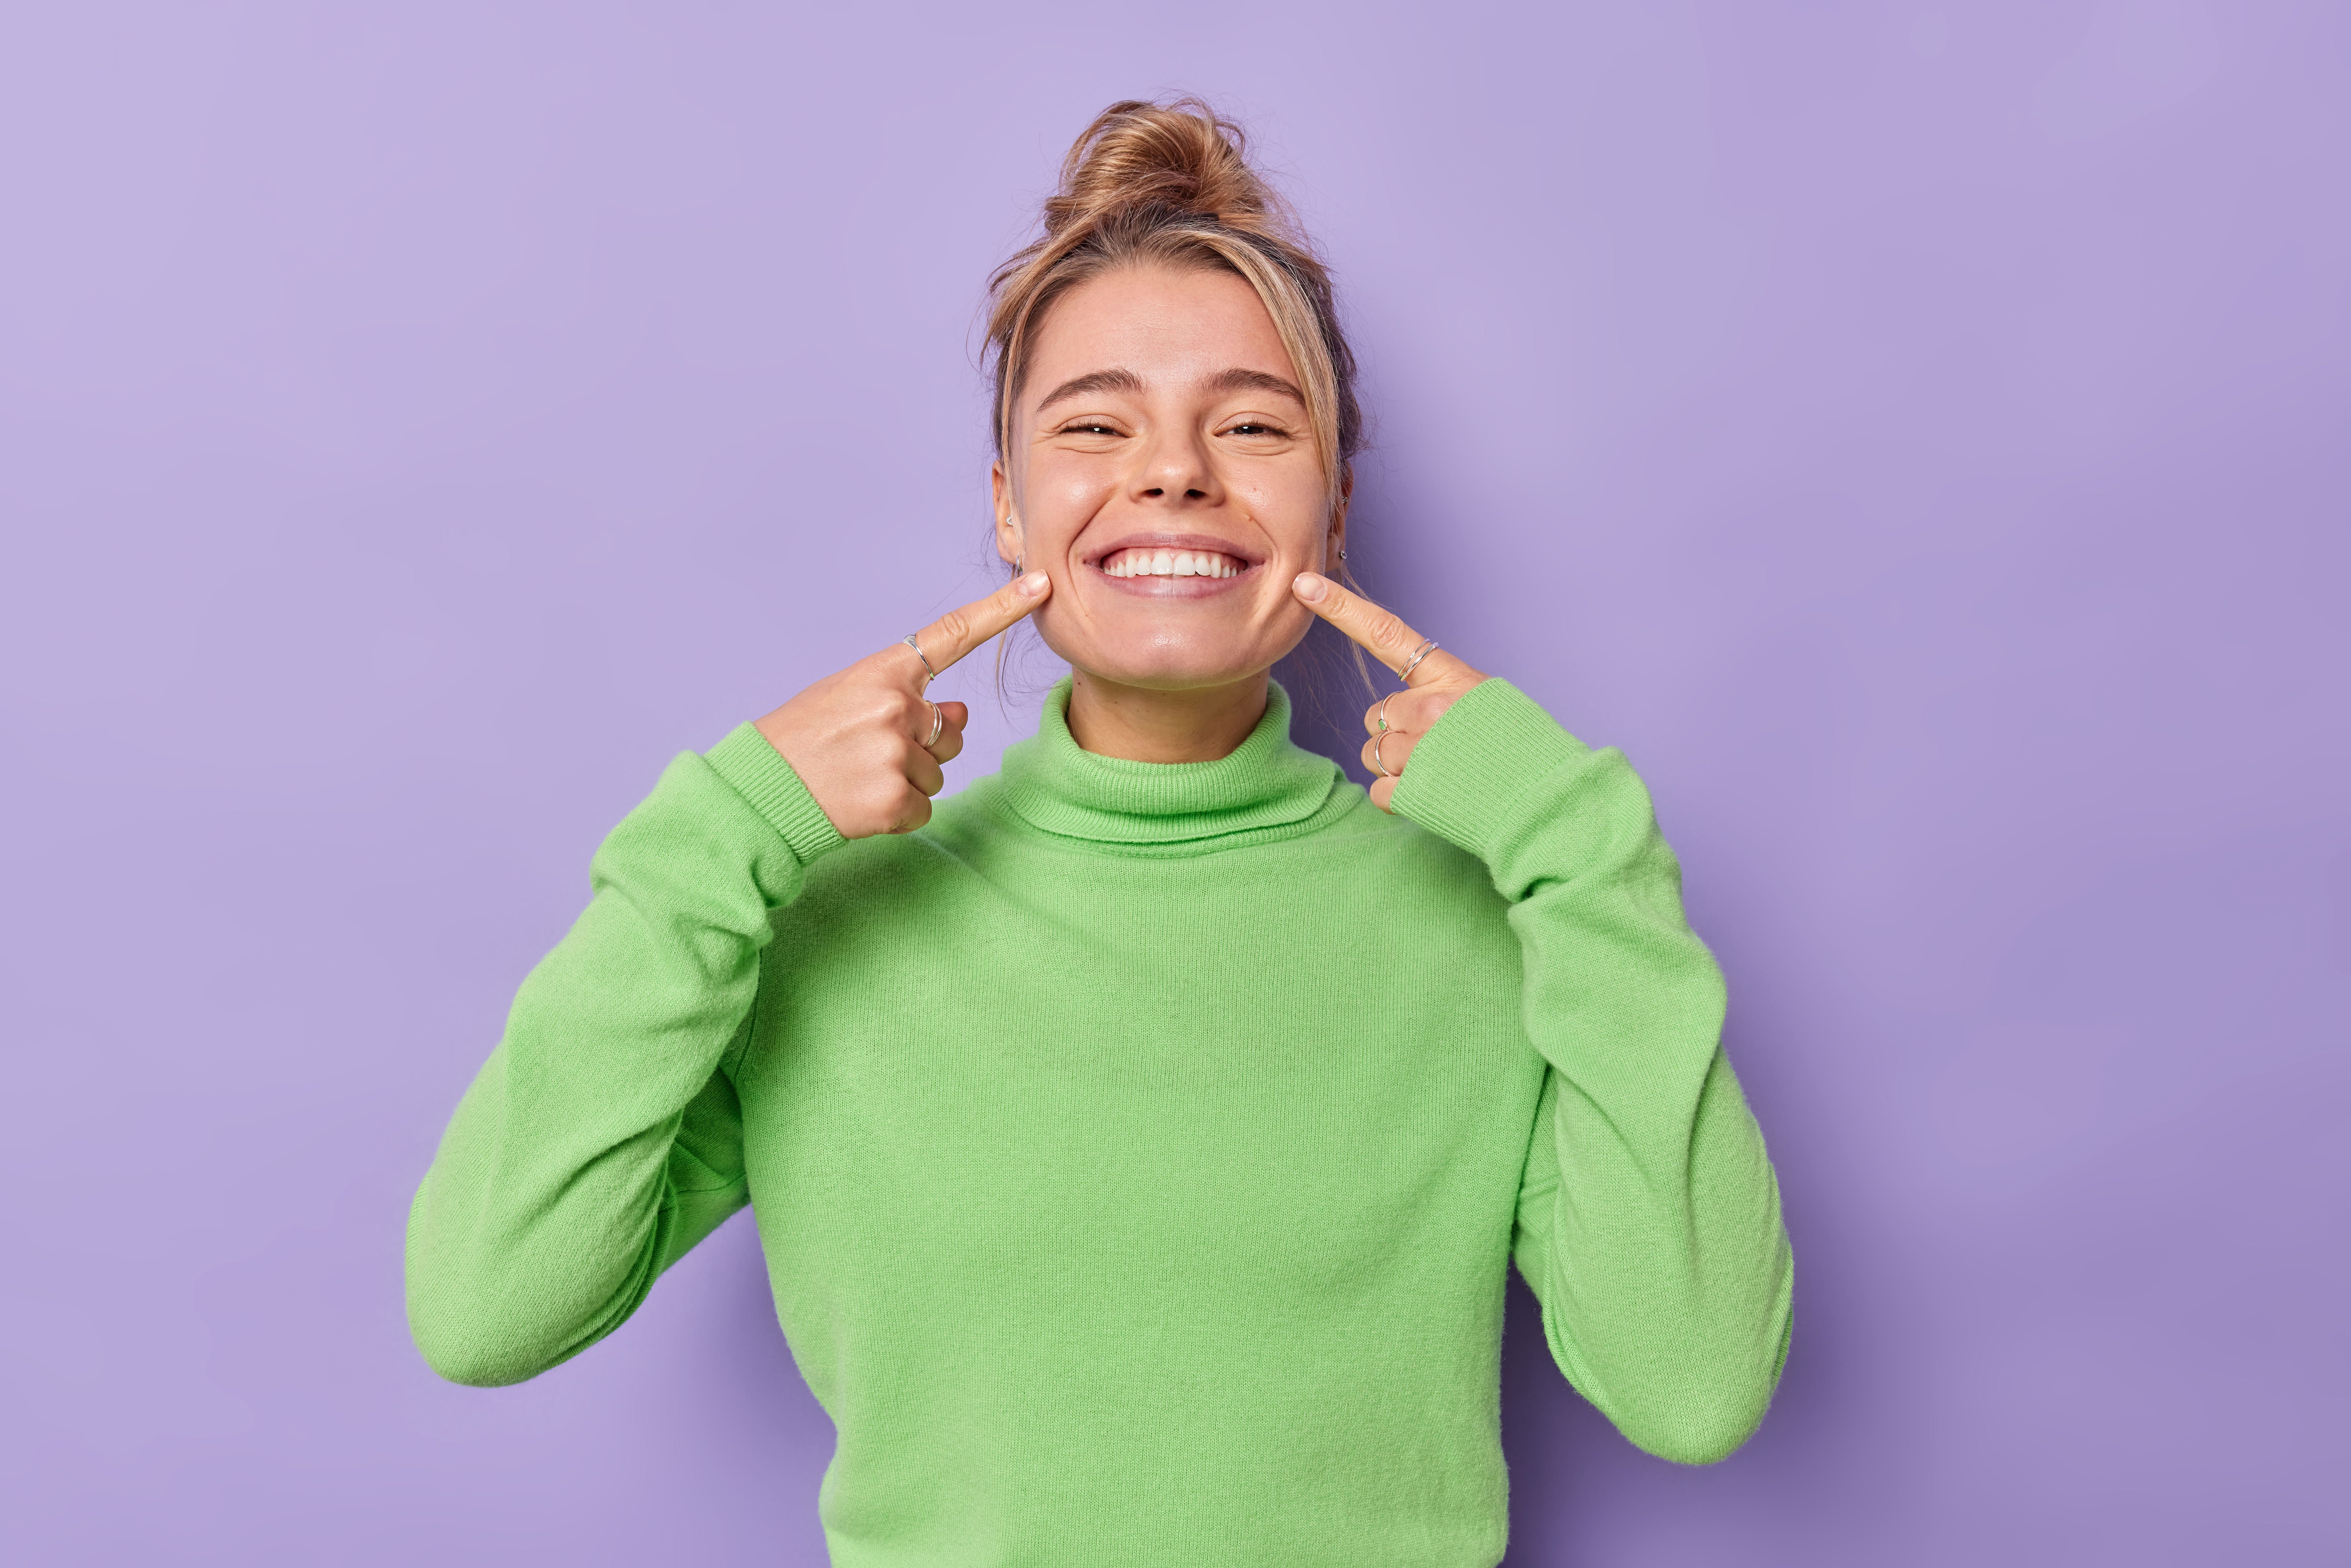 beautiful-happy-fair-haired-european-woman-points-index-fingers-mouth-forces-cheerful-smile-shows-perfect-white-teeth-wears-green-jumper-being-good-mood-isolated-purple-background.jpg